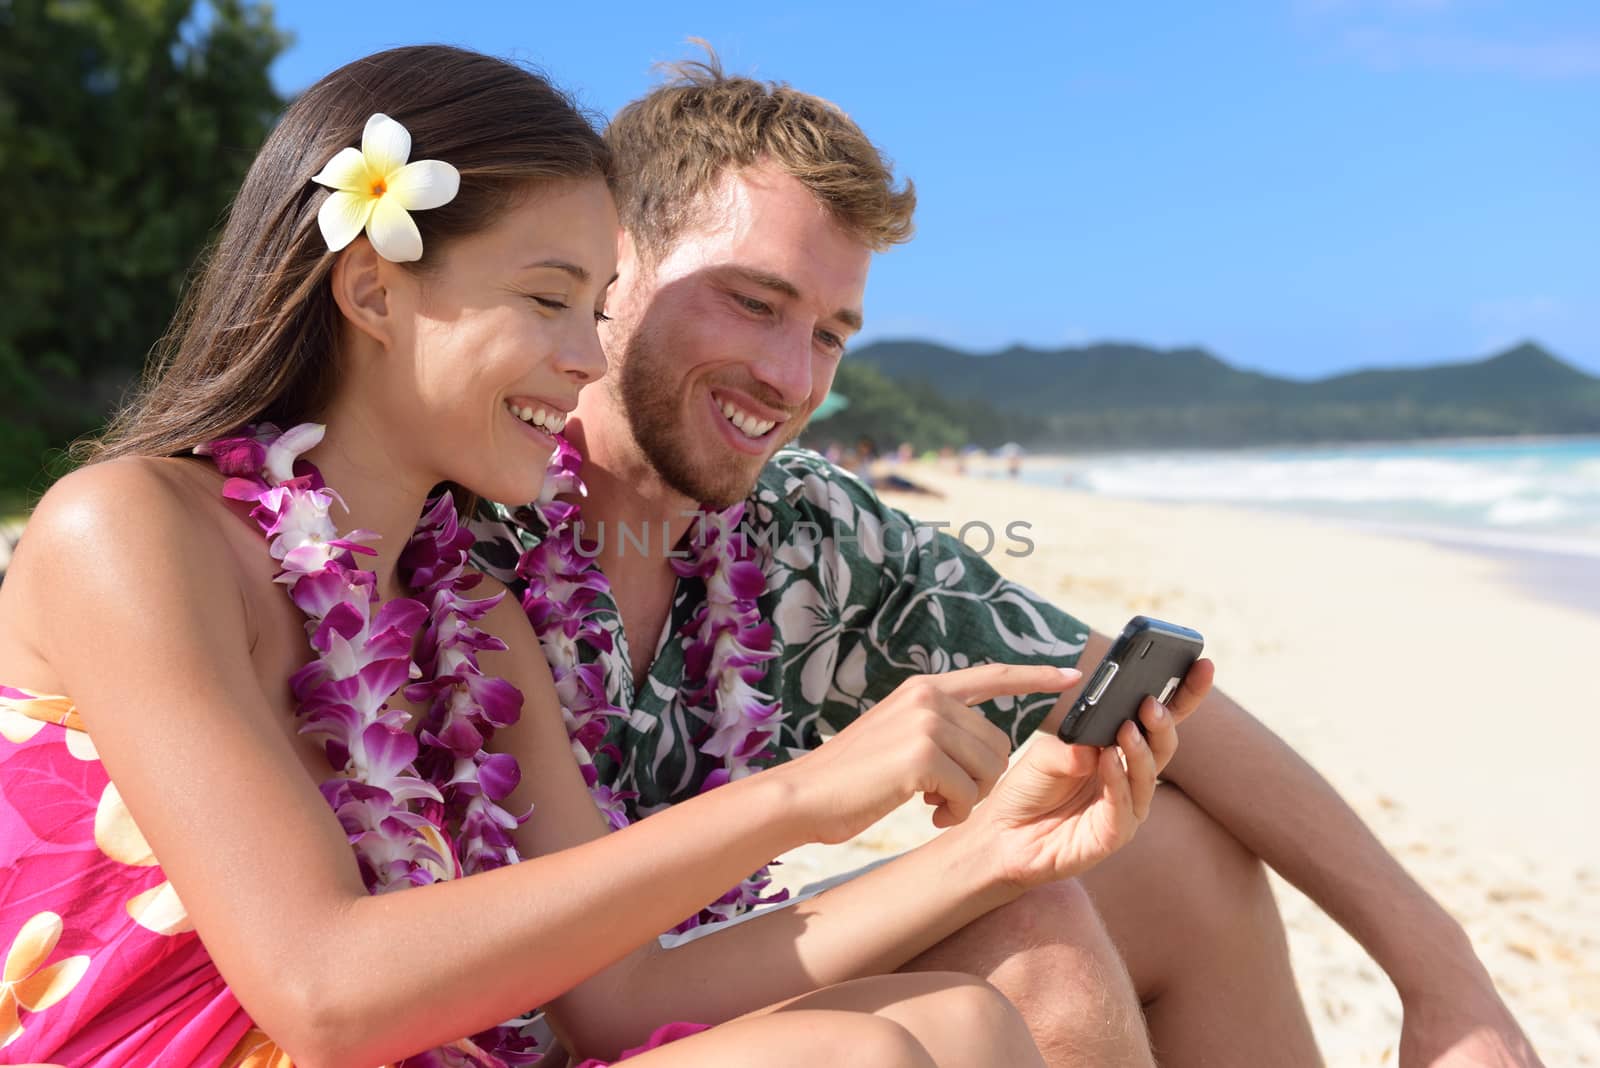 Couple on beach using smart phone app sharing photos on social media on Hawaii with smart phone. Young woman and man in love on beach vacations in Hawaiian clothing flower lei.